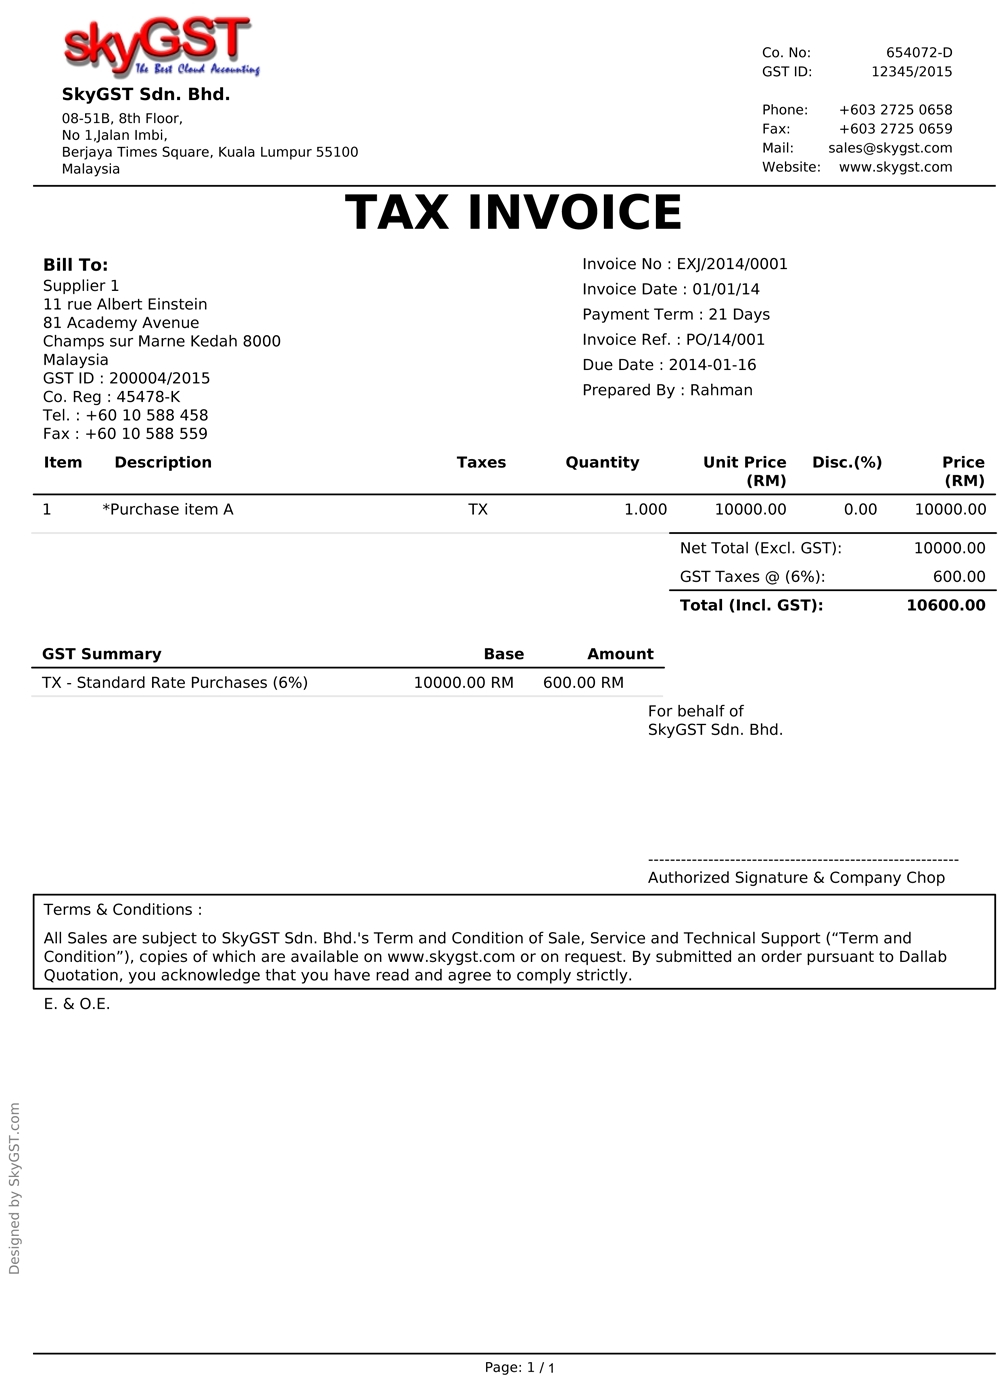 examples of tax invoices blank histogram template tax invoice examples